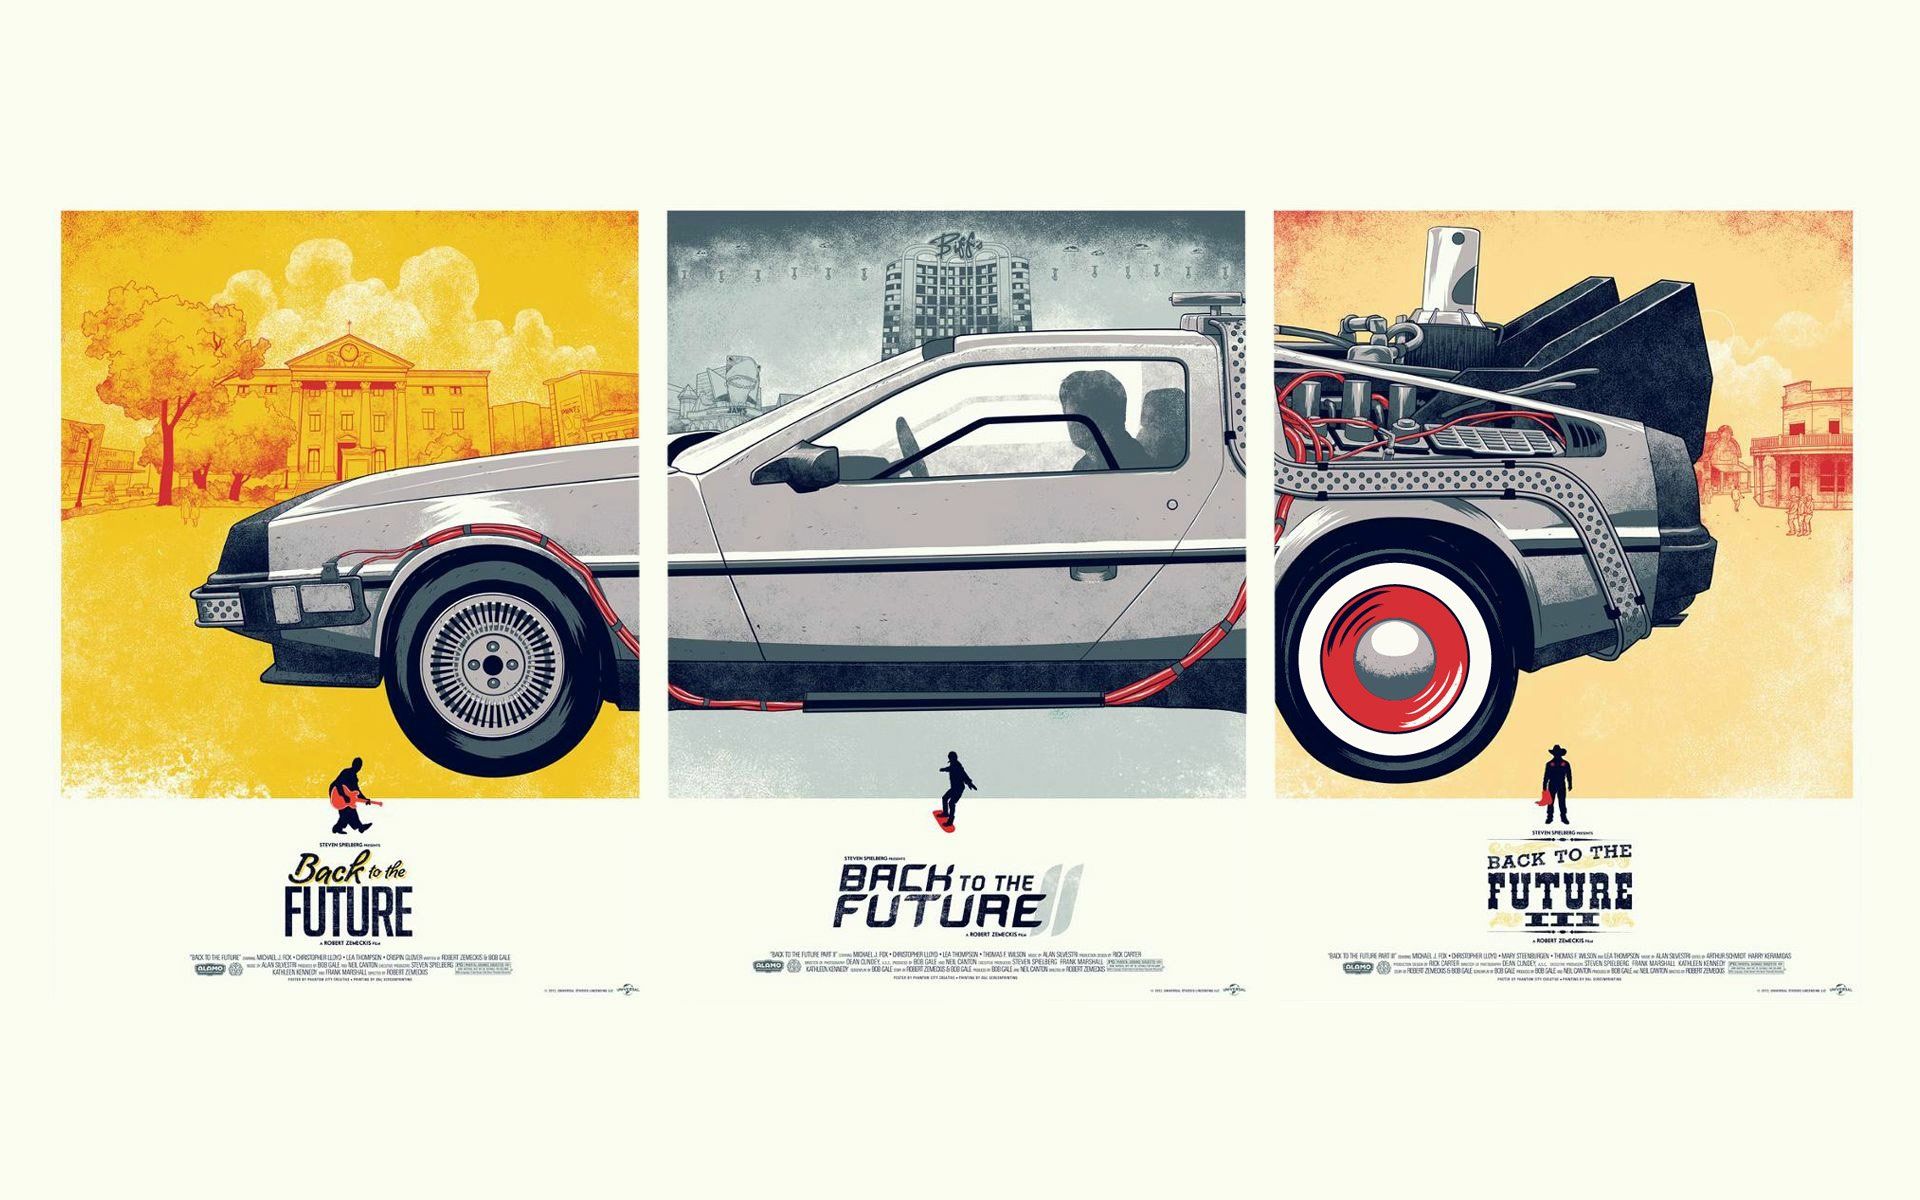 Back To The Future HD Wallpaper. Background. Future wallpaper, Future poster, Back to the future